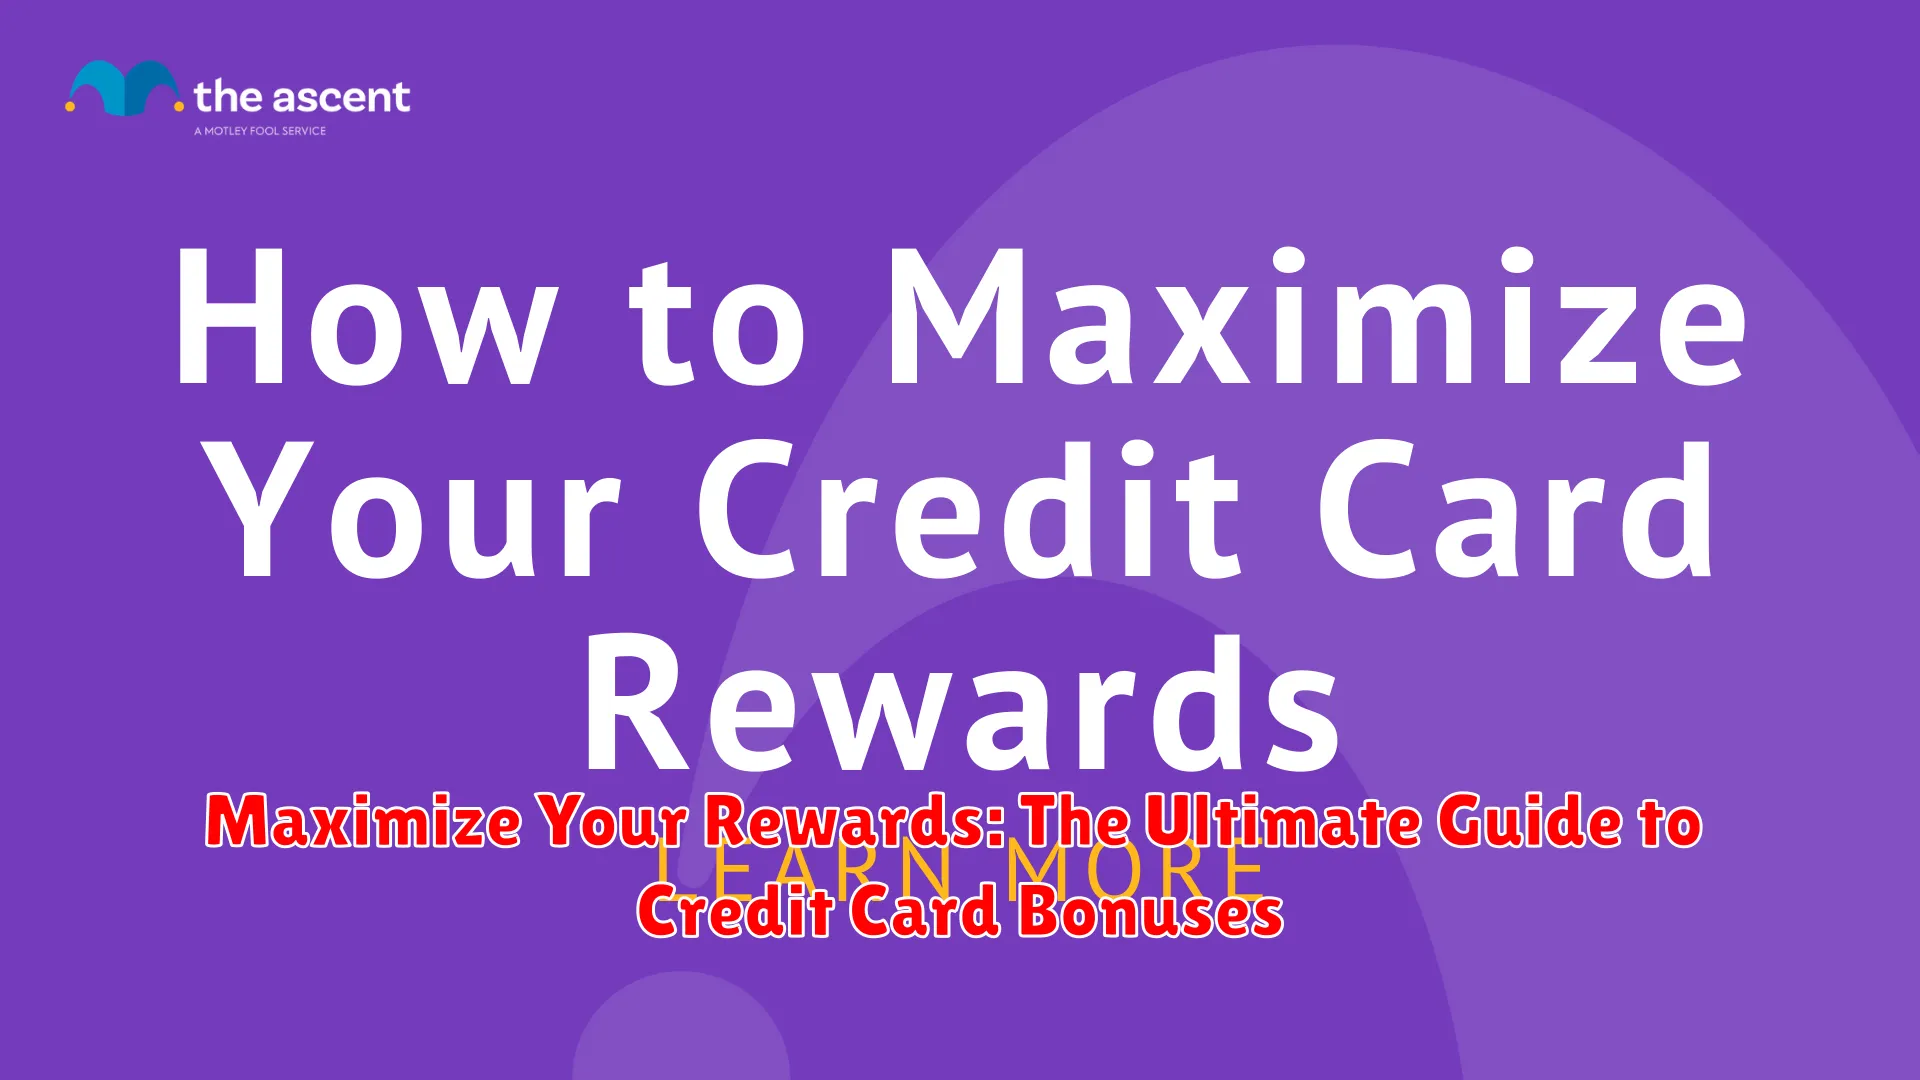 Maximize Your Rewards: The Ultimate Guide to Credit Card Bonuses